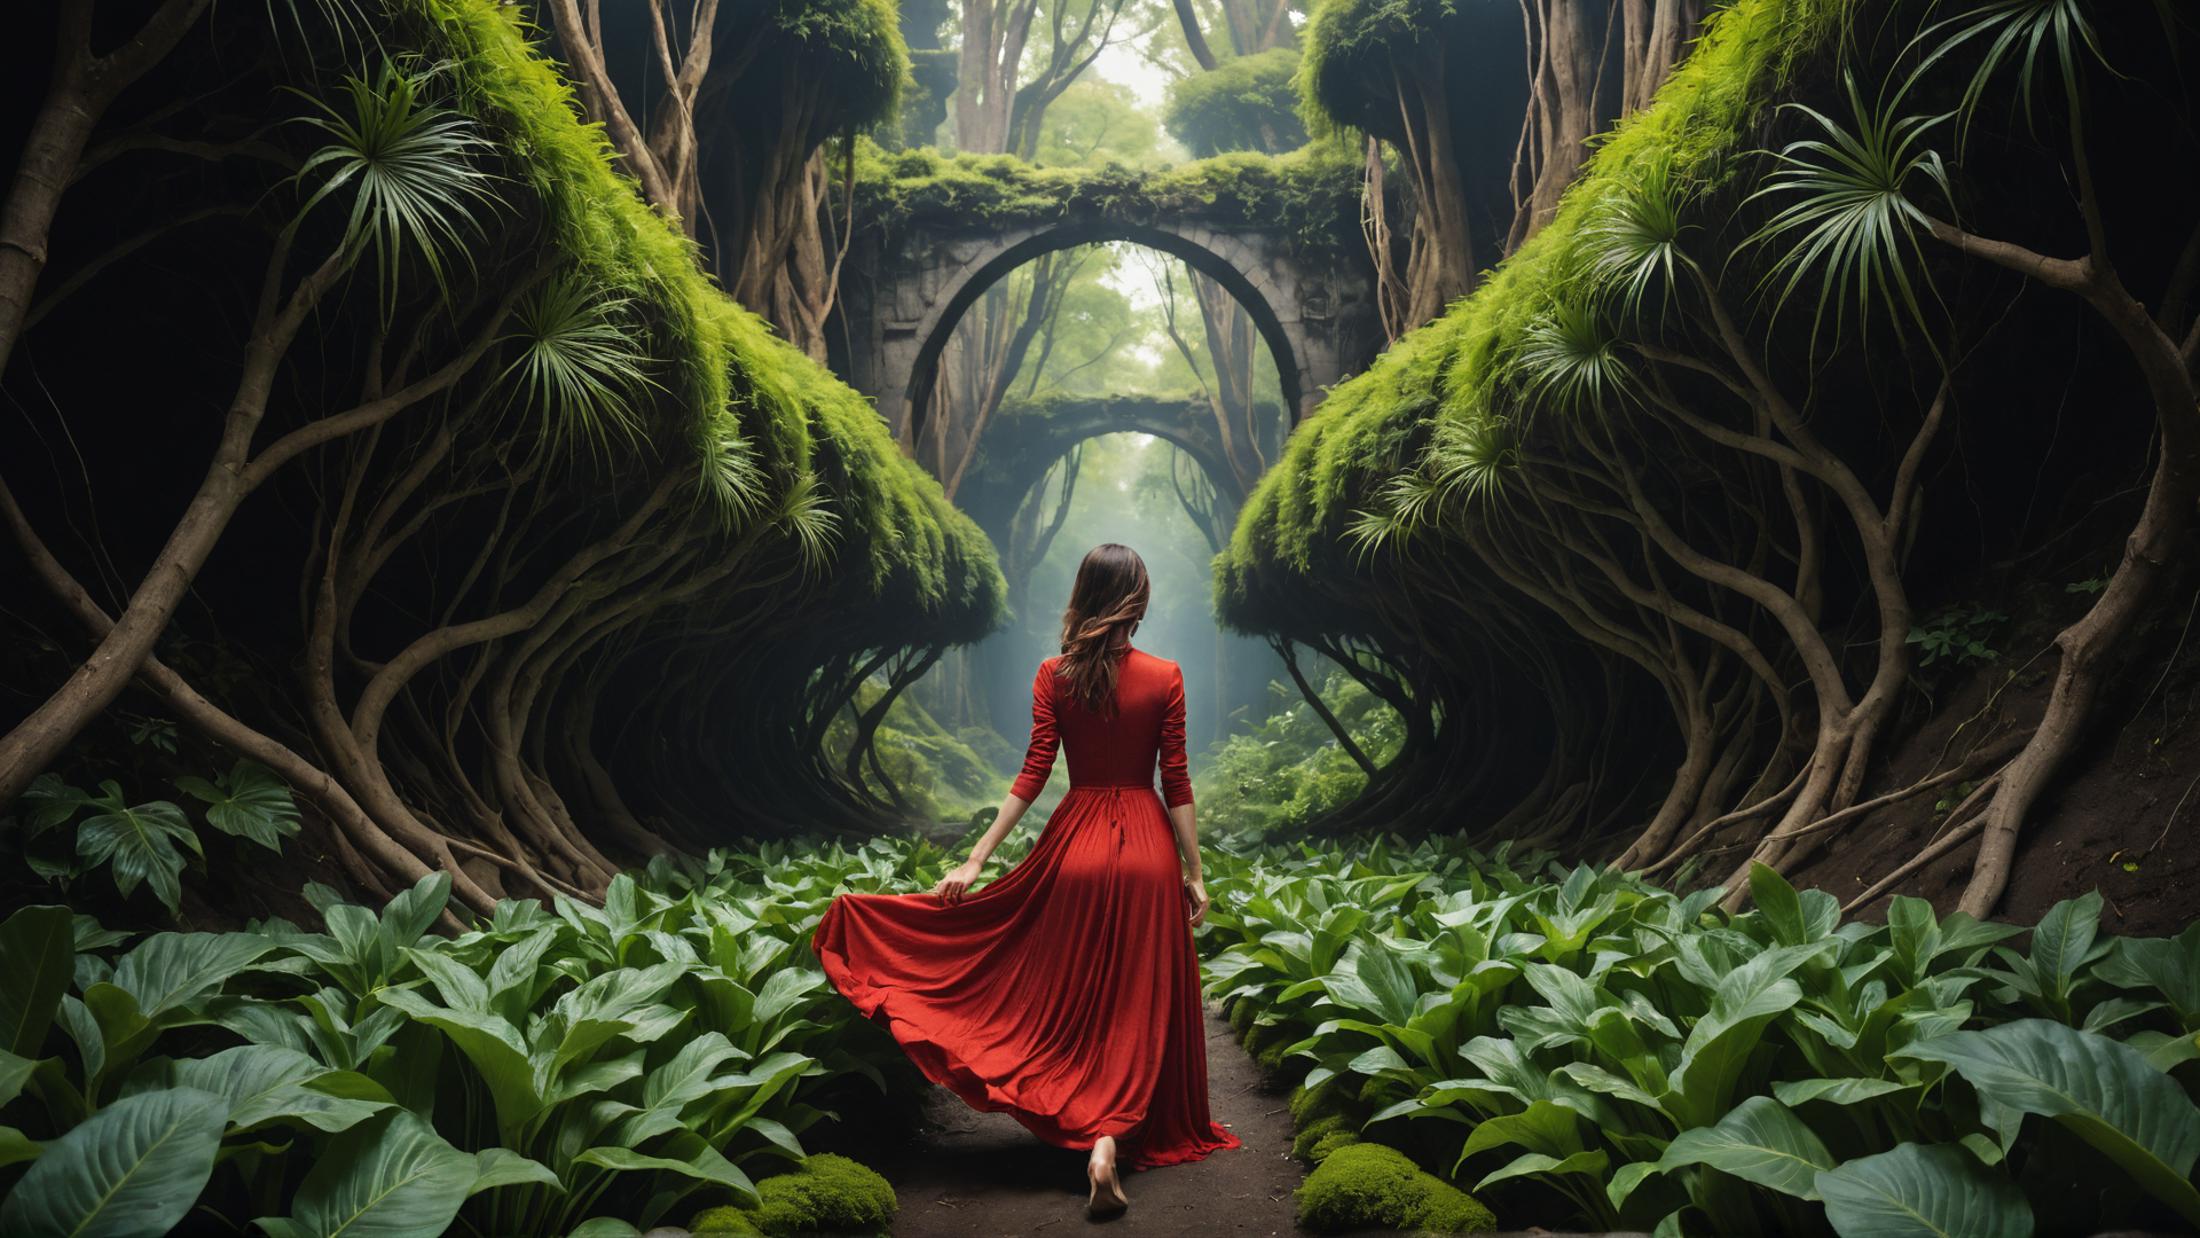 A woman in a red dress walking through a lush green forest.